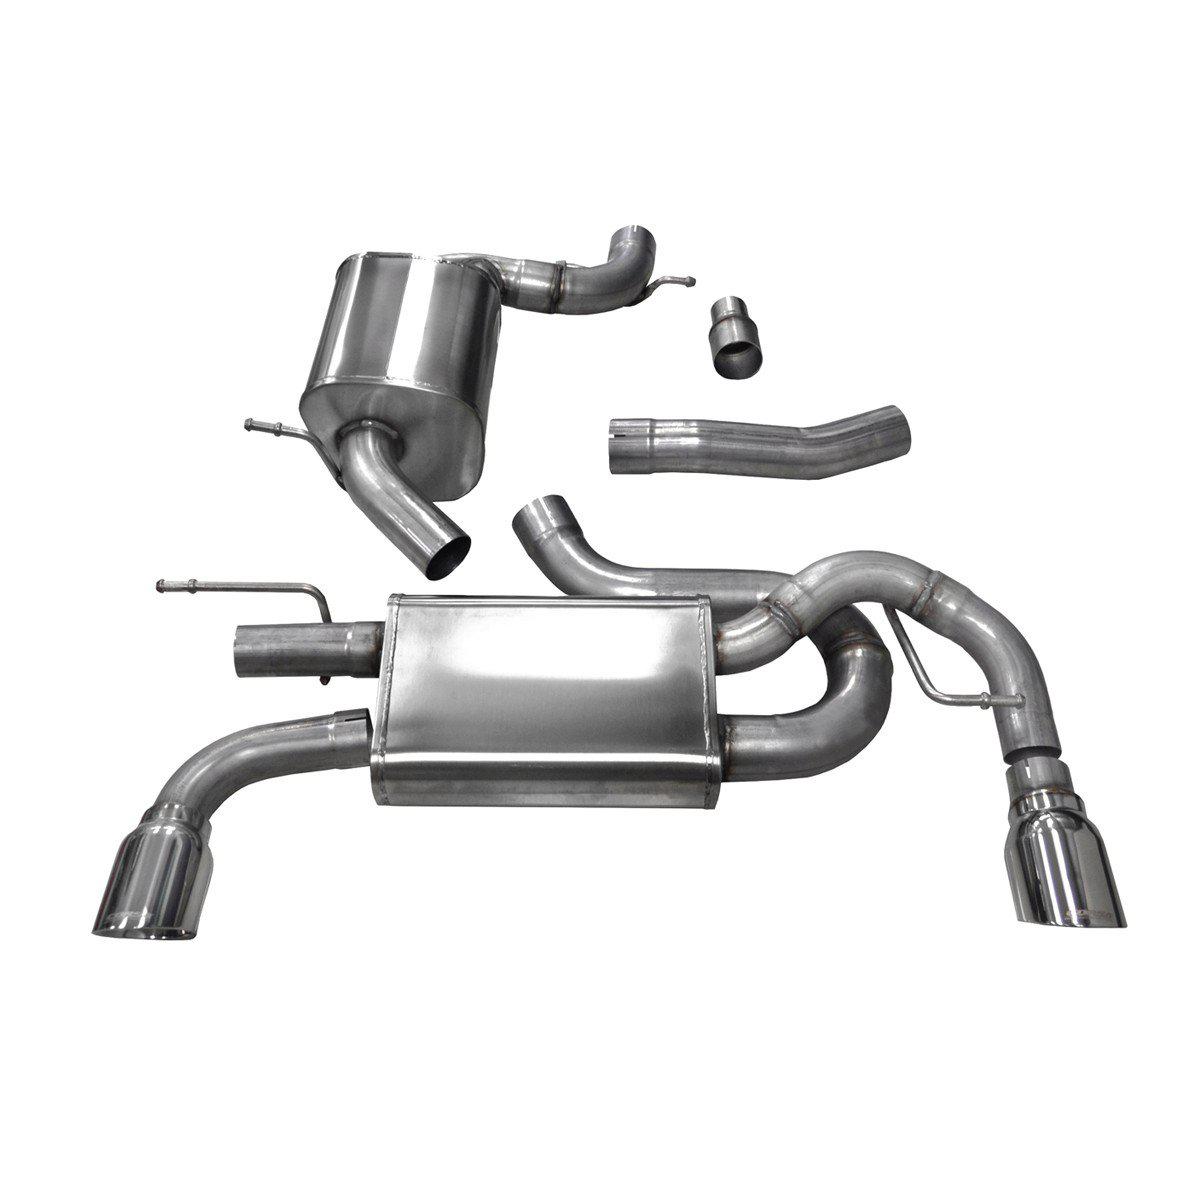 Corsa Performance MKVI Volkswagen Golf/GTI 2.0T Cat-Back Exhaust System-A Little Tuning Co